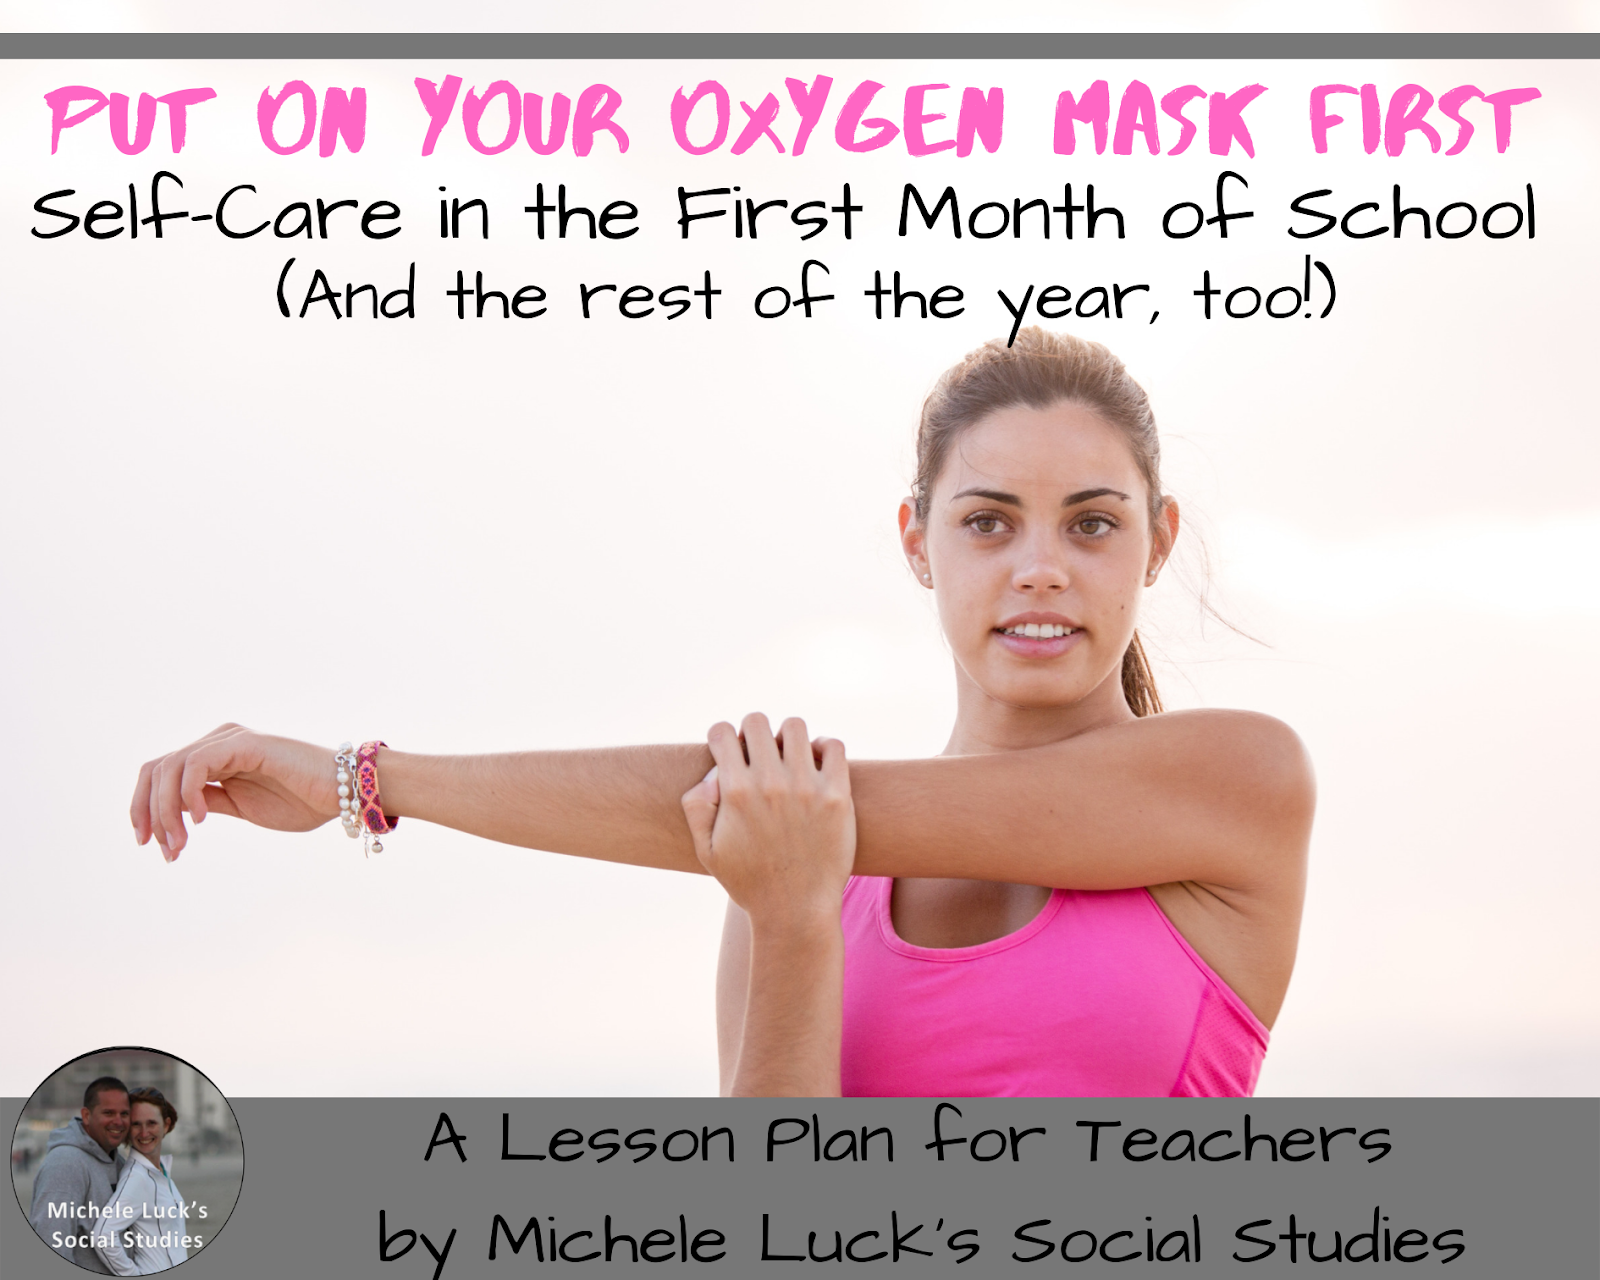 Put on Your Oxygen Mask First: Self-Care in the First Month of School (and the rest of the year, too!)